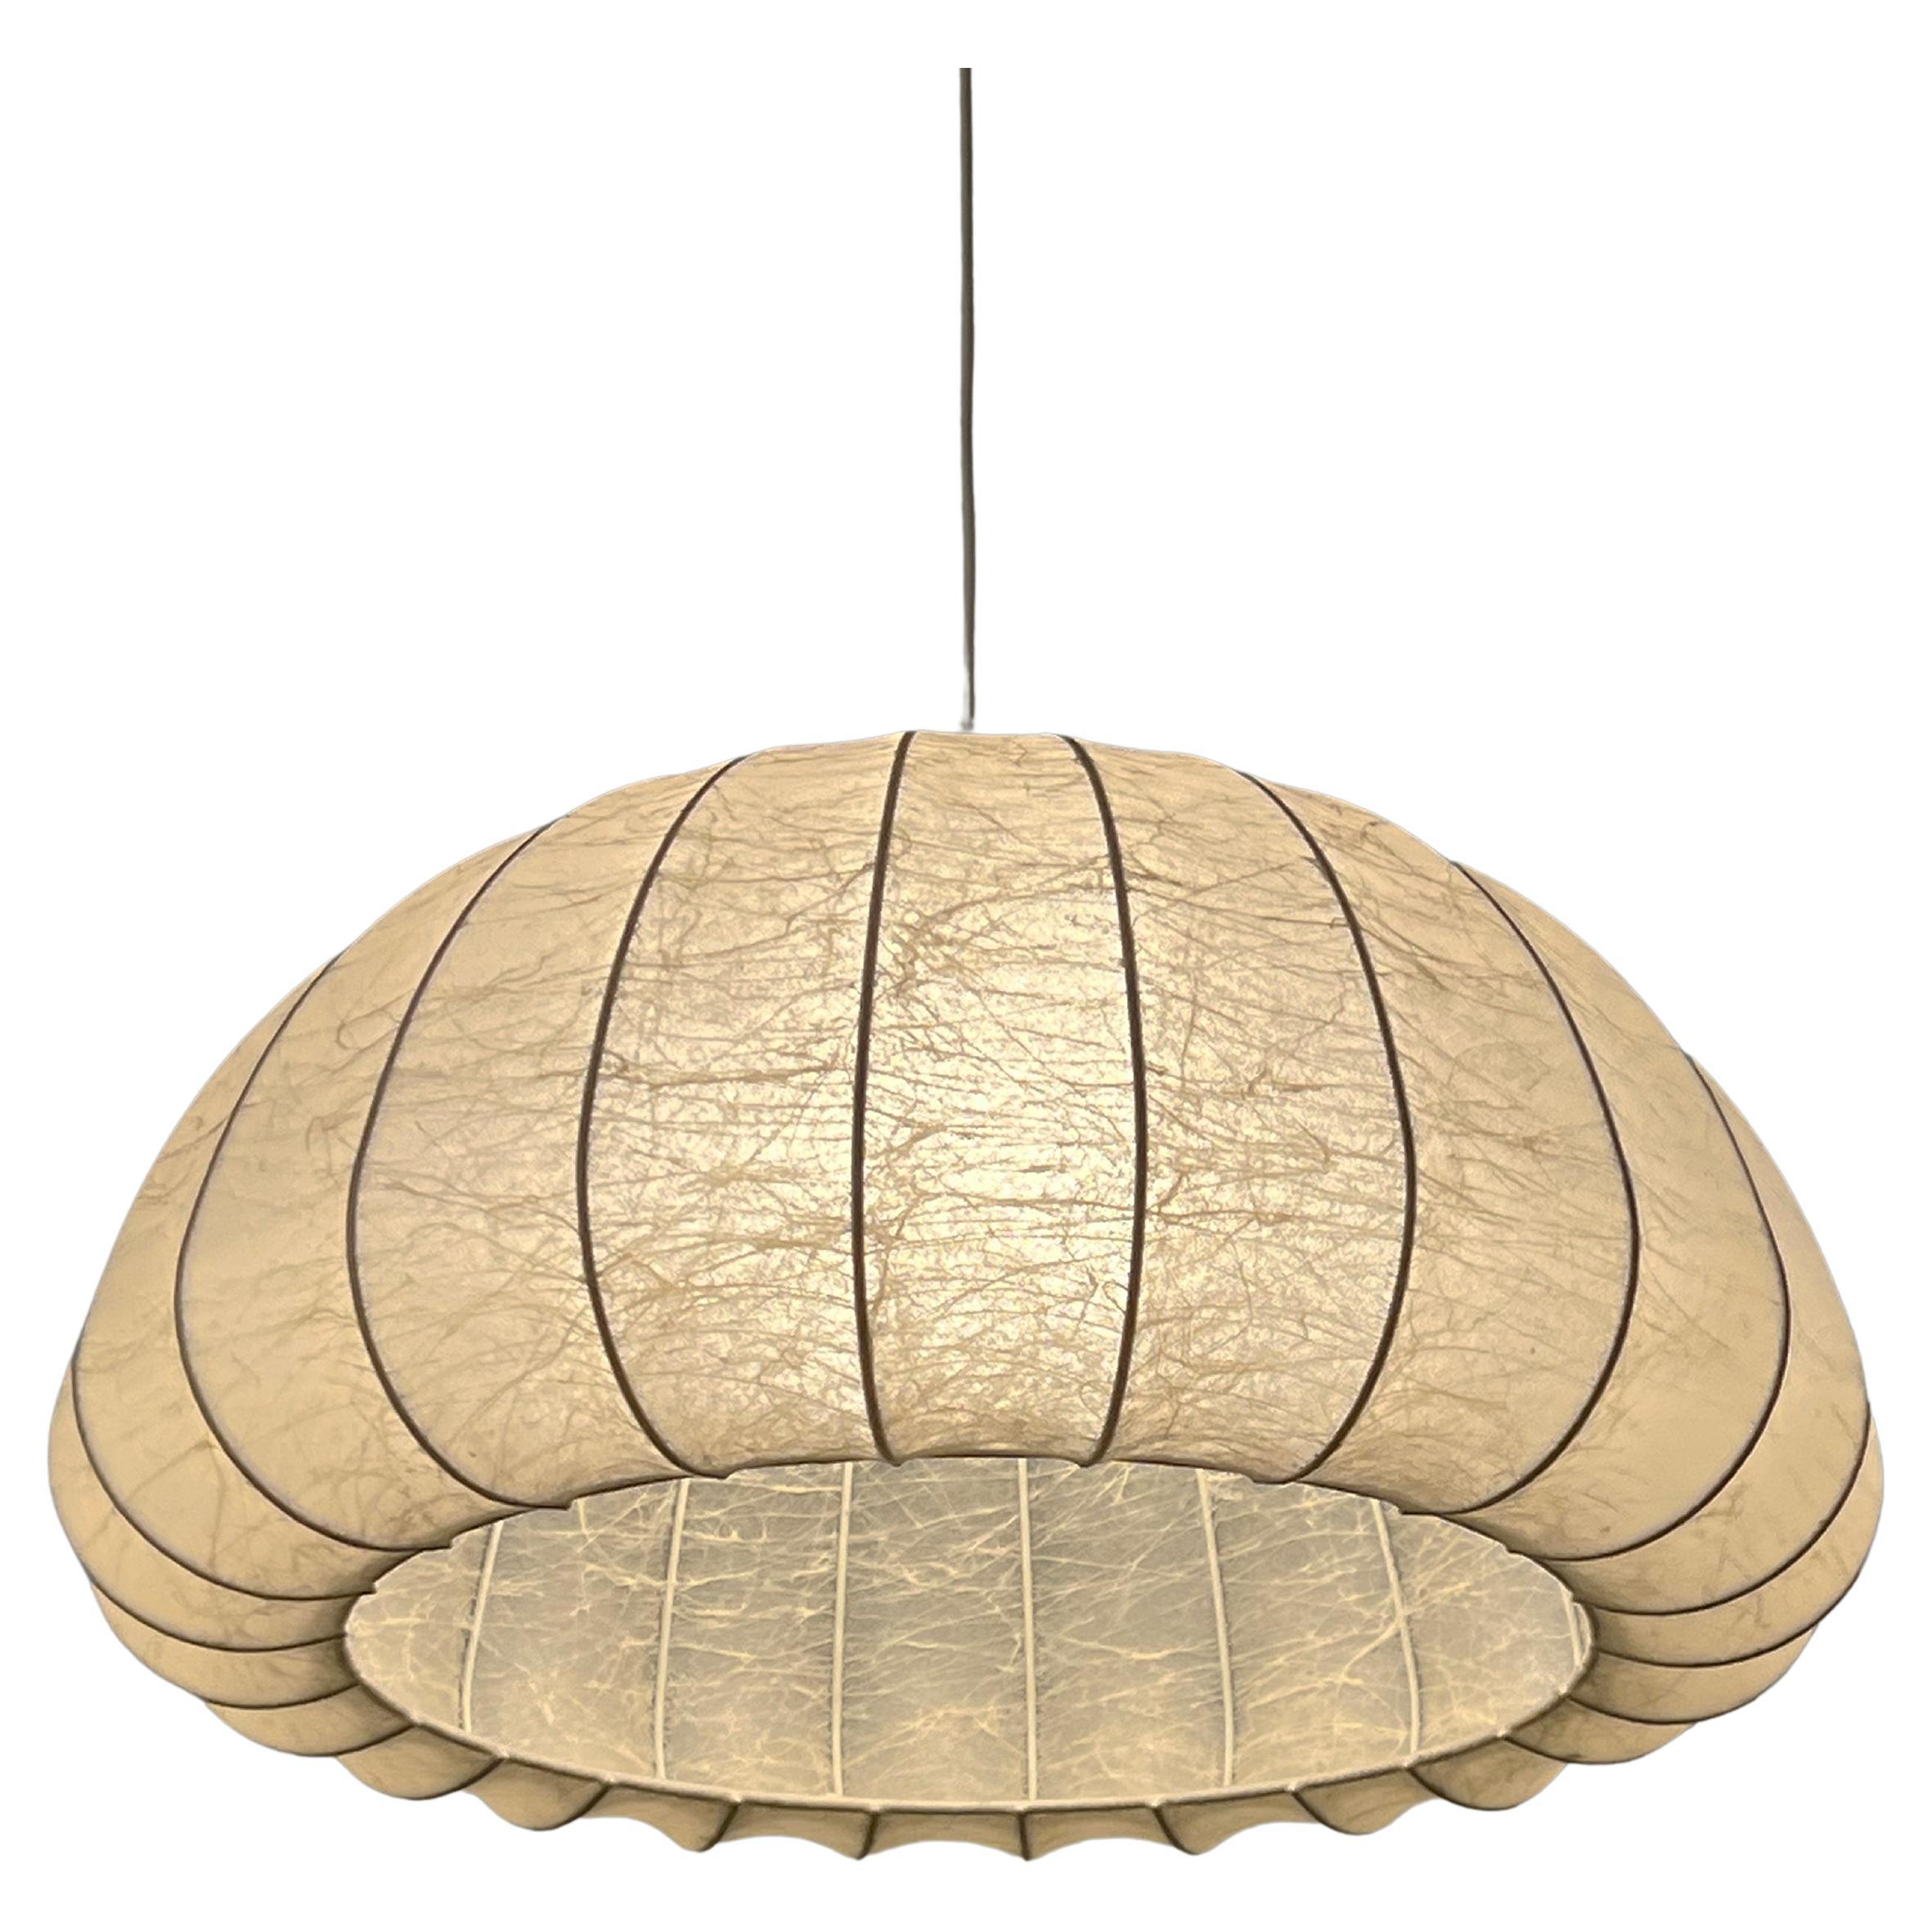 Cocoon chandelier designed by Friedel Wauer for Goldkant Leuchten, Germany 1970s